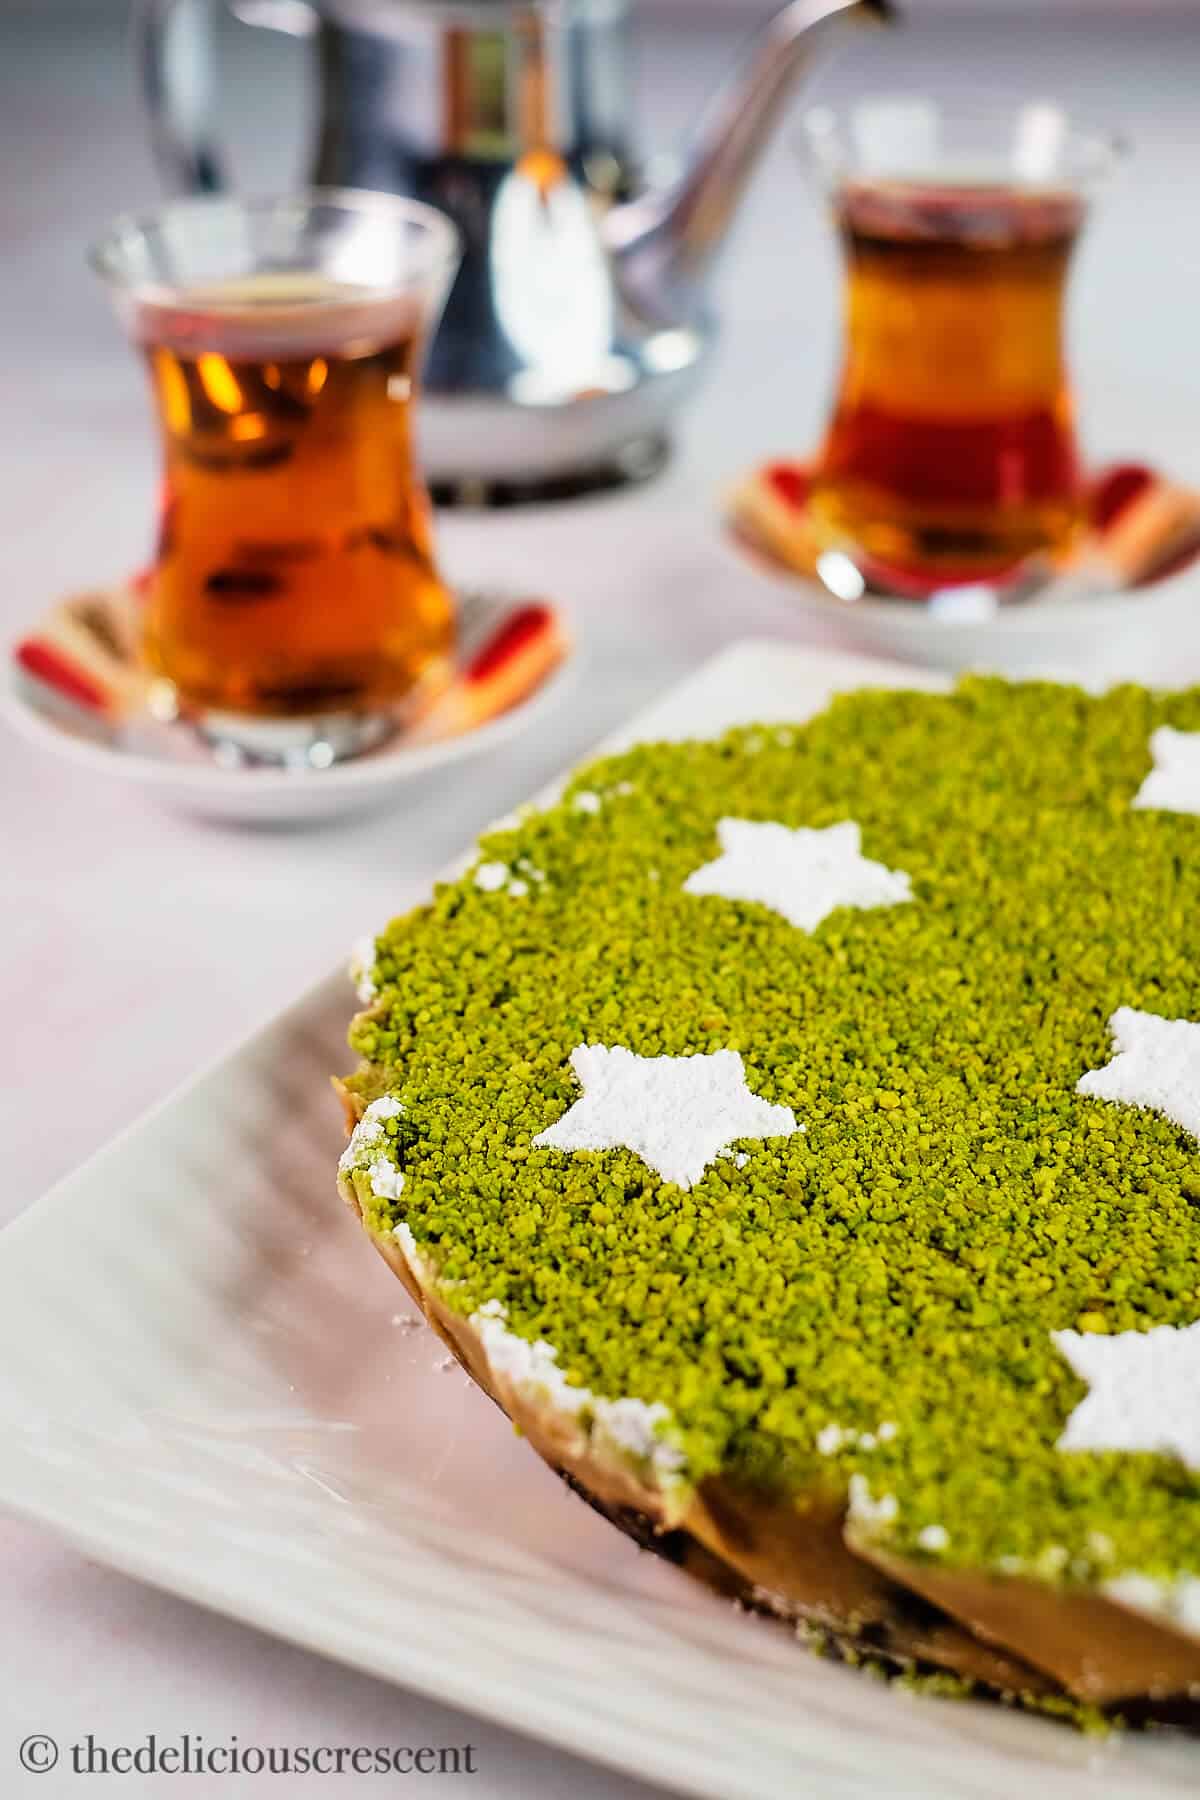 Persian sweet Ranginak placed on a table.